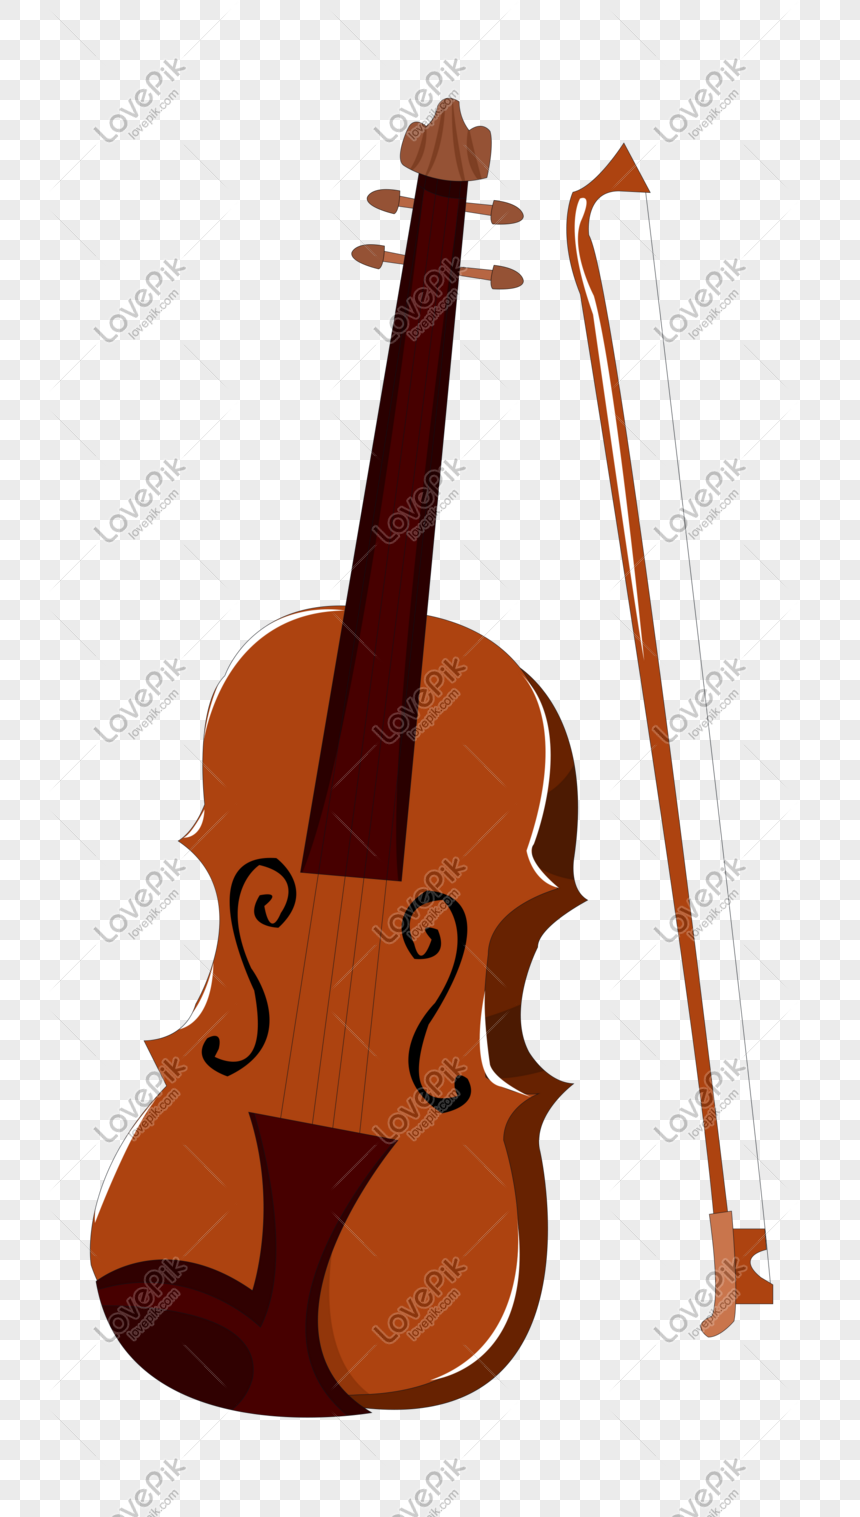 Cartoon Festival Music Instrument Violin PNG Transparent Background And  Clipart Image For Free Download - Lovepik | 611472440